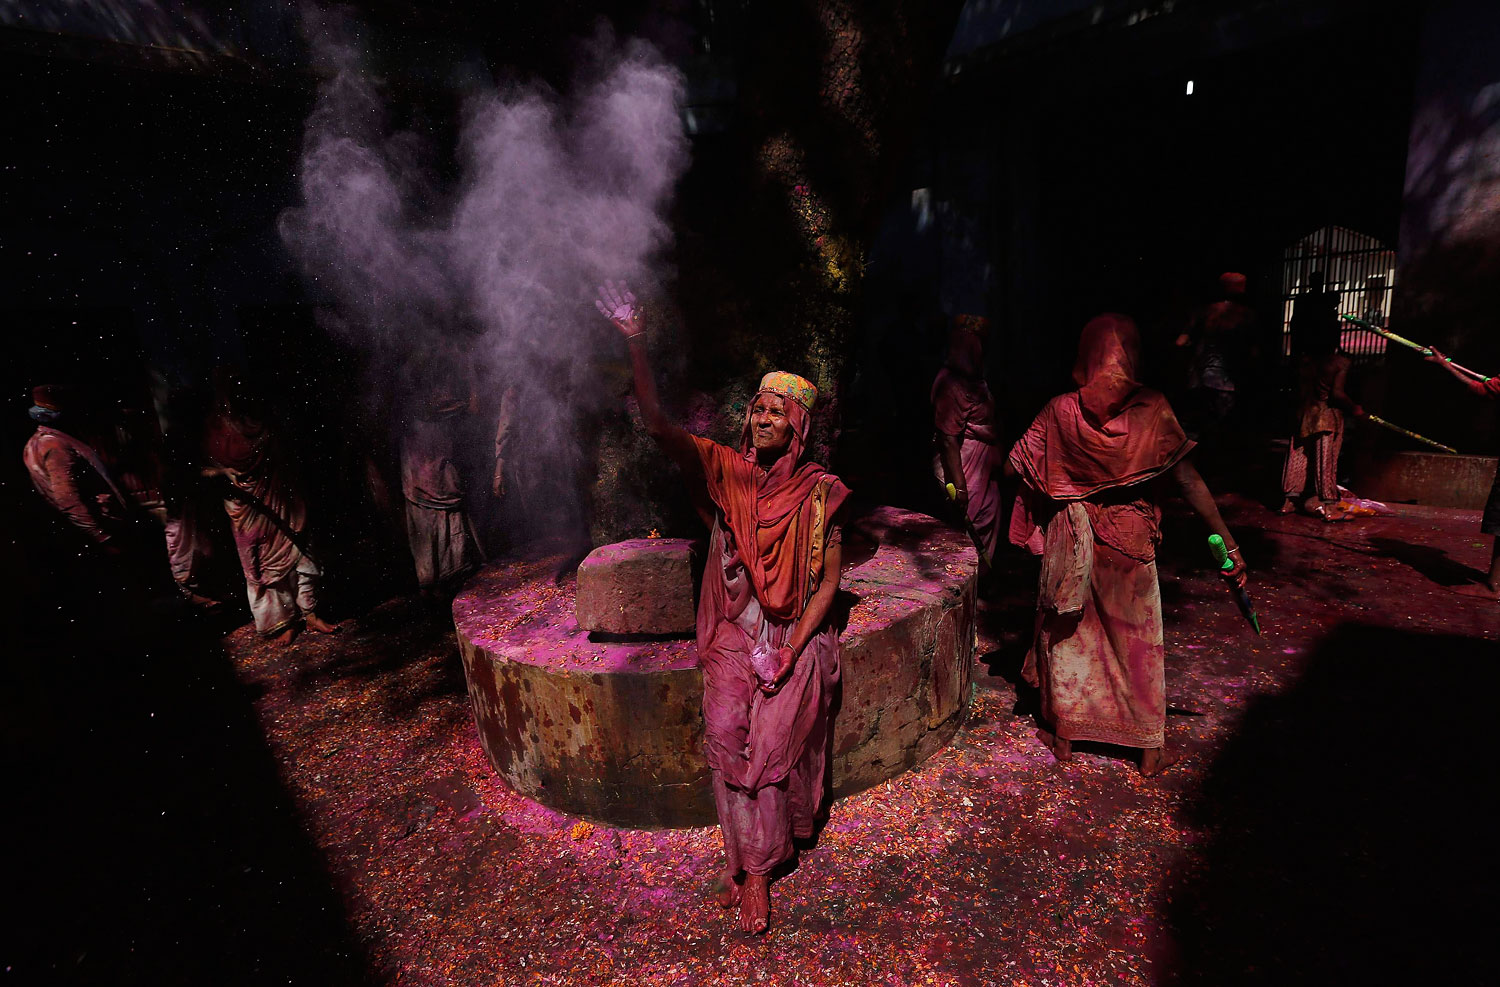 A widow throws coloured powder into the air during Holi celebrations organised by non-governmental organisation Sulabh International at a widows' ashram in Vrindavan in the northern Indian state of Uttar Pradesh, March 17, 2014.